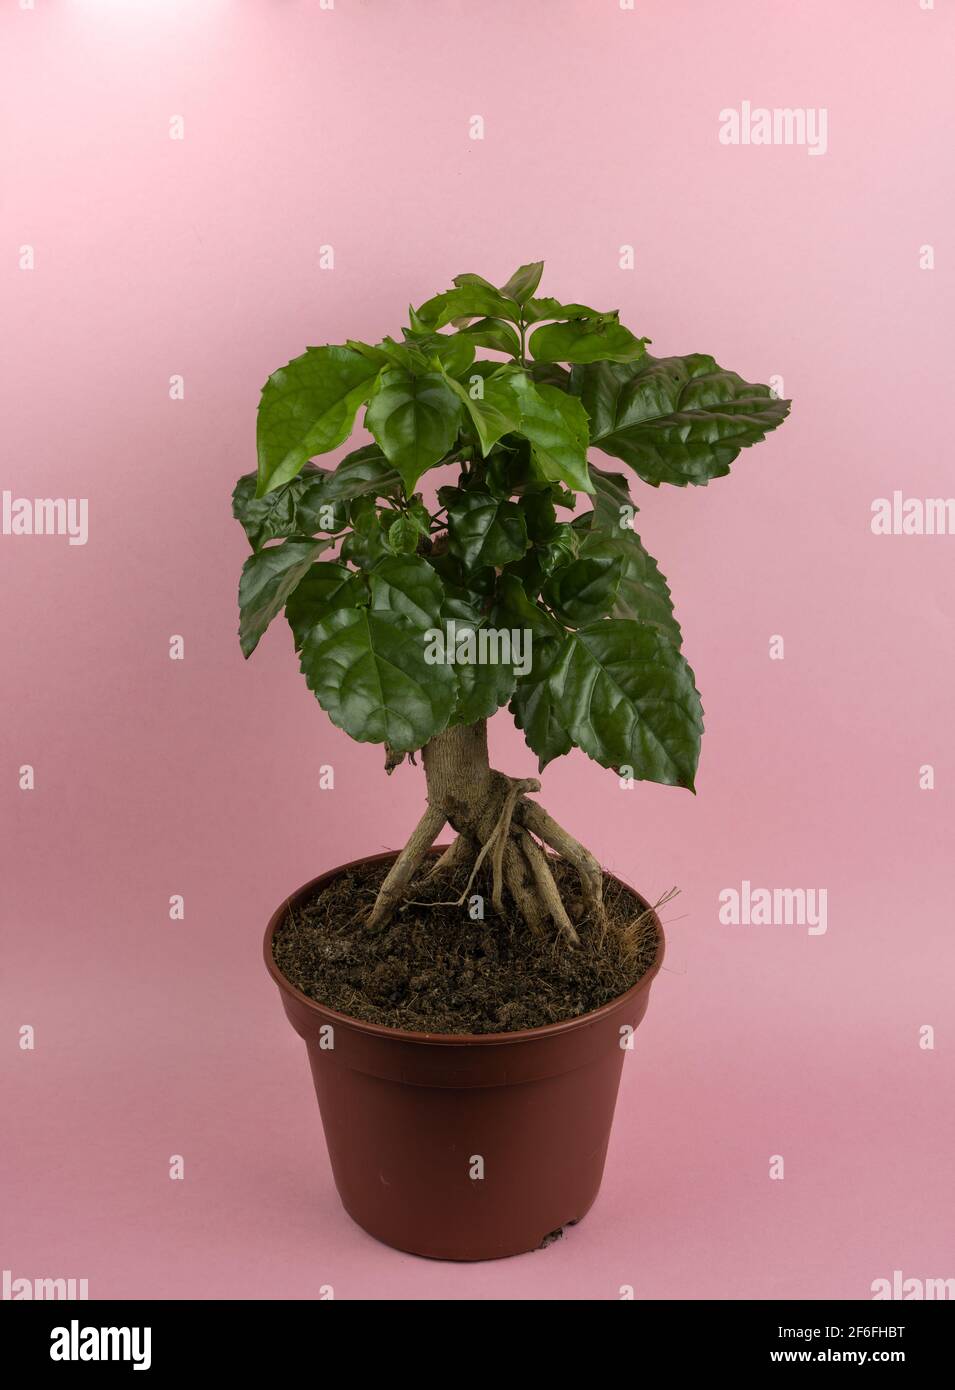 radermachera sinica in pot with pink background, top view Stock Photo